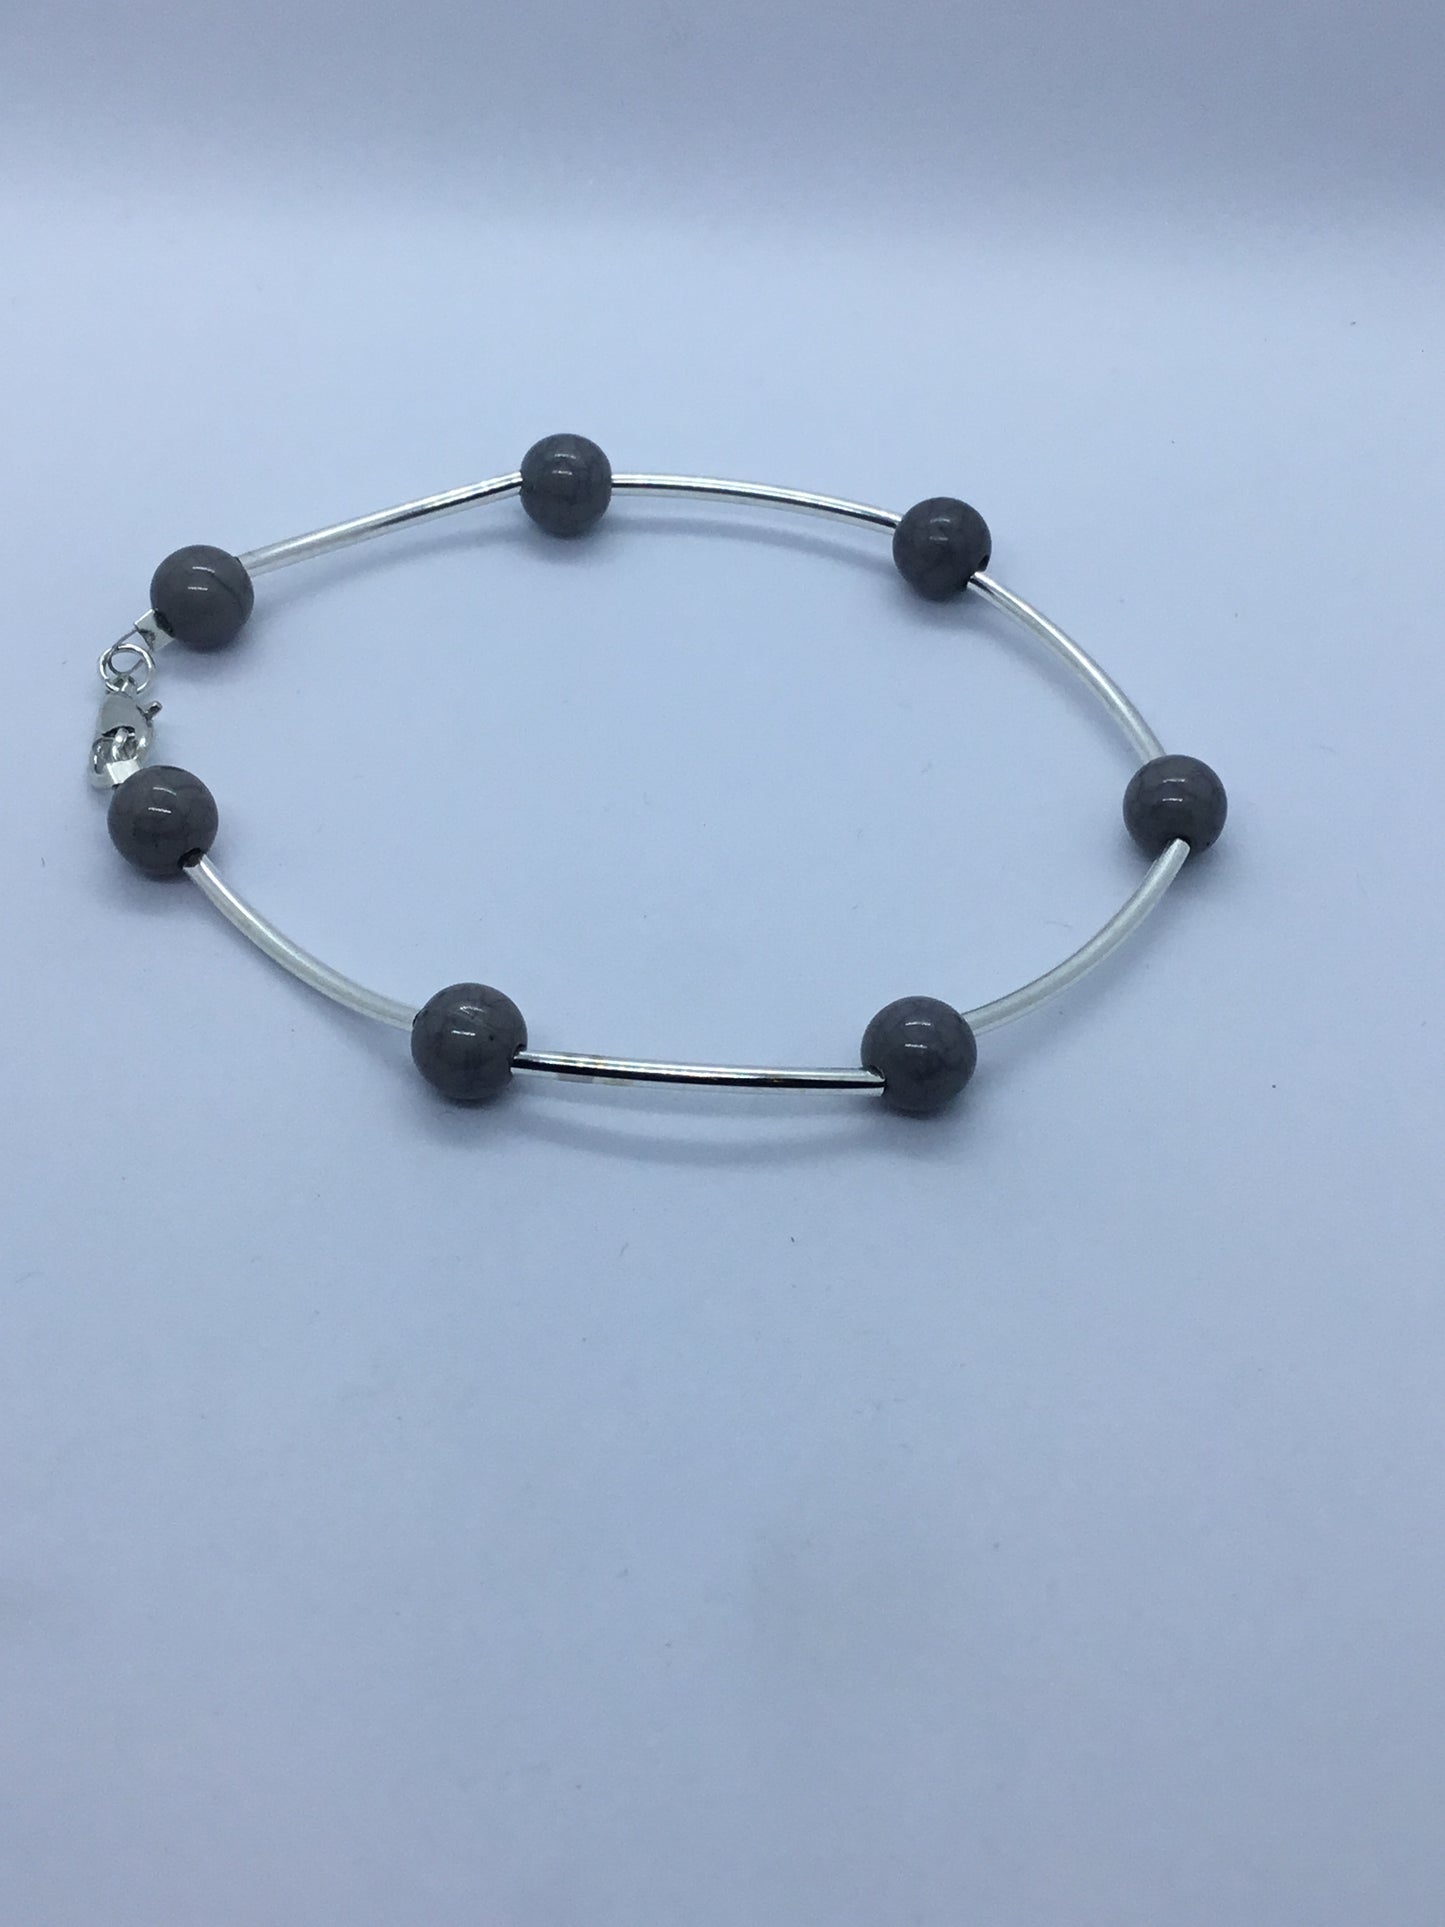 Wire & grey bead bracelet with silver rod spacers